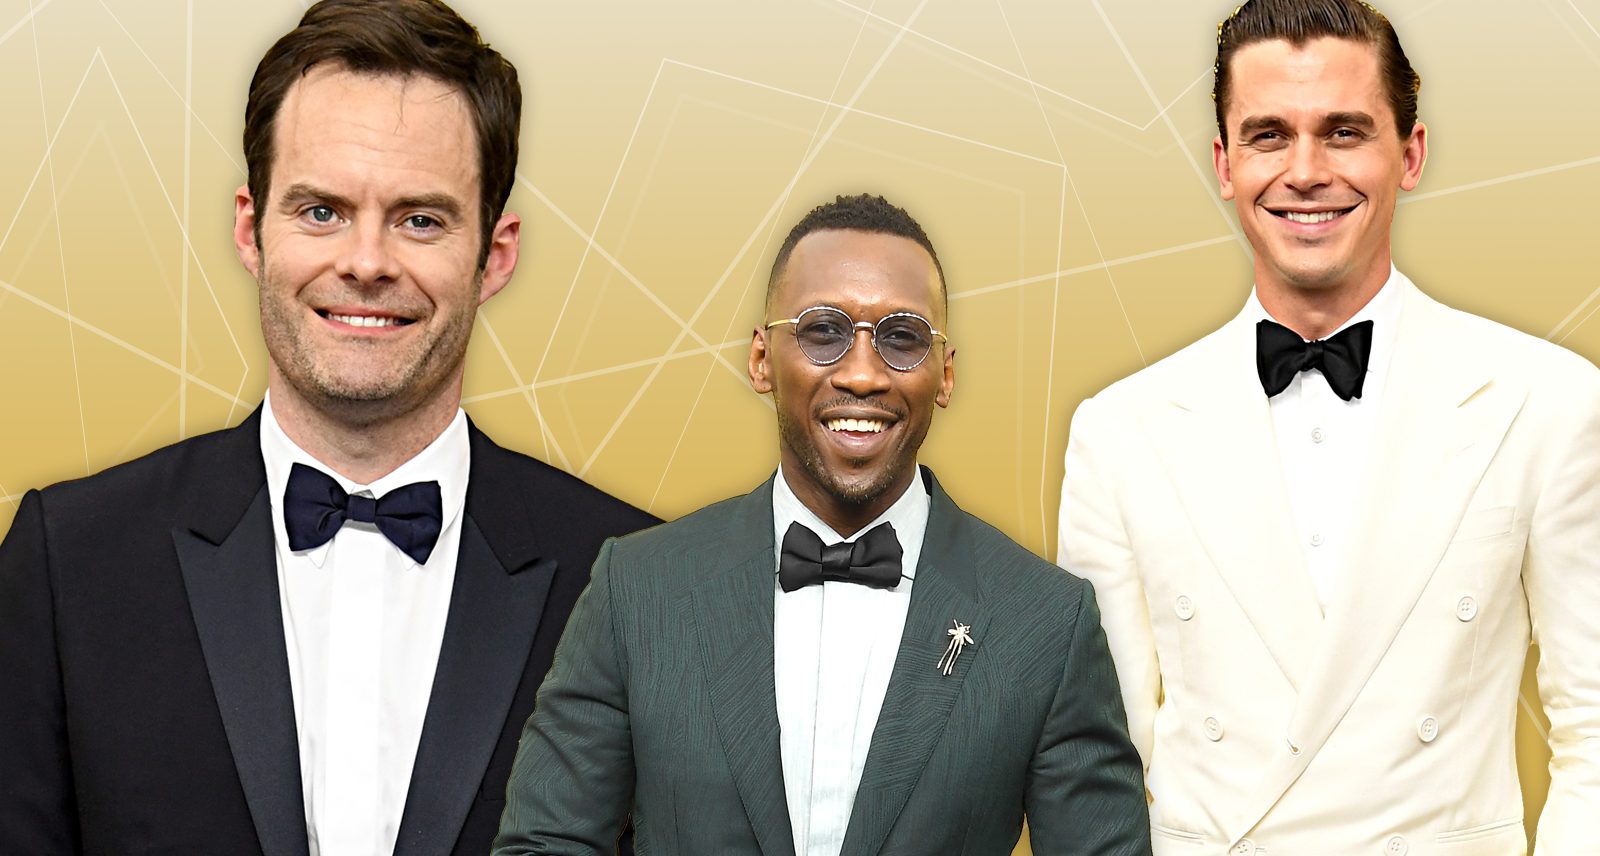 The Best-Dressed Men at the 2019 Emmy Awards